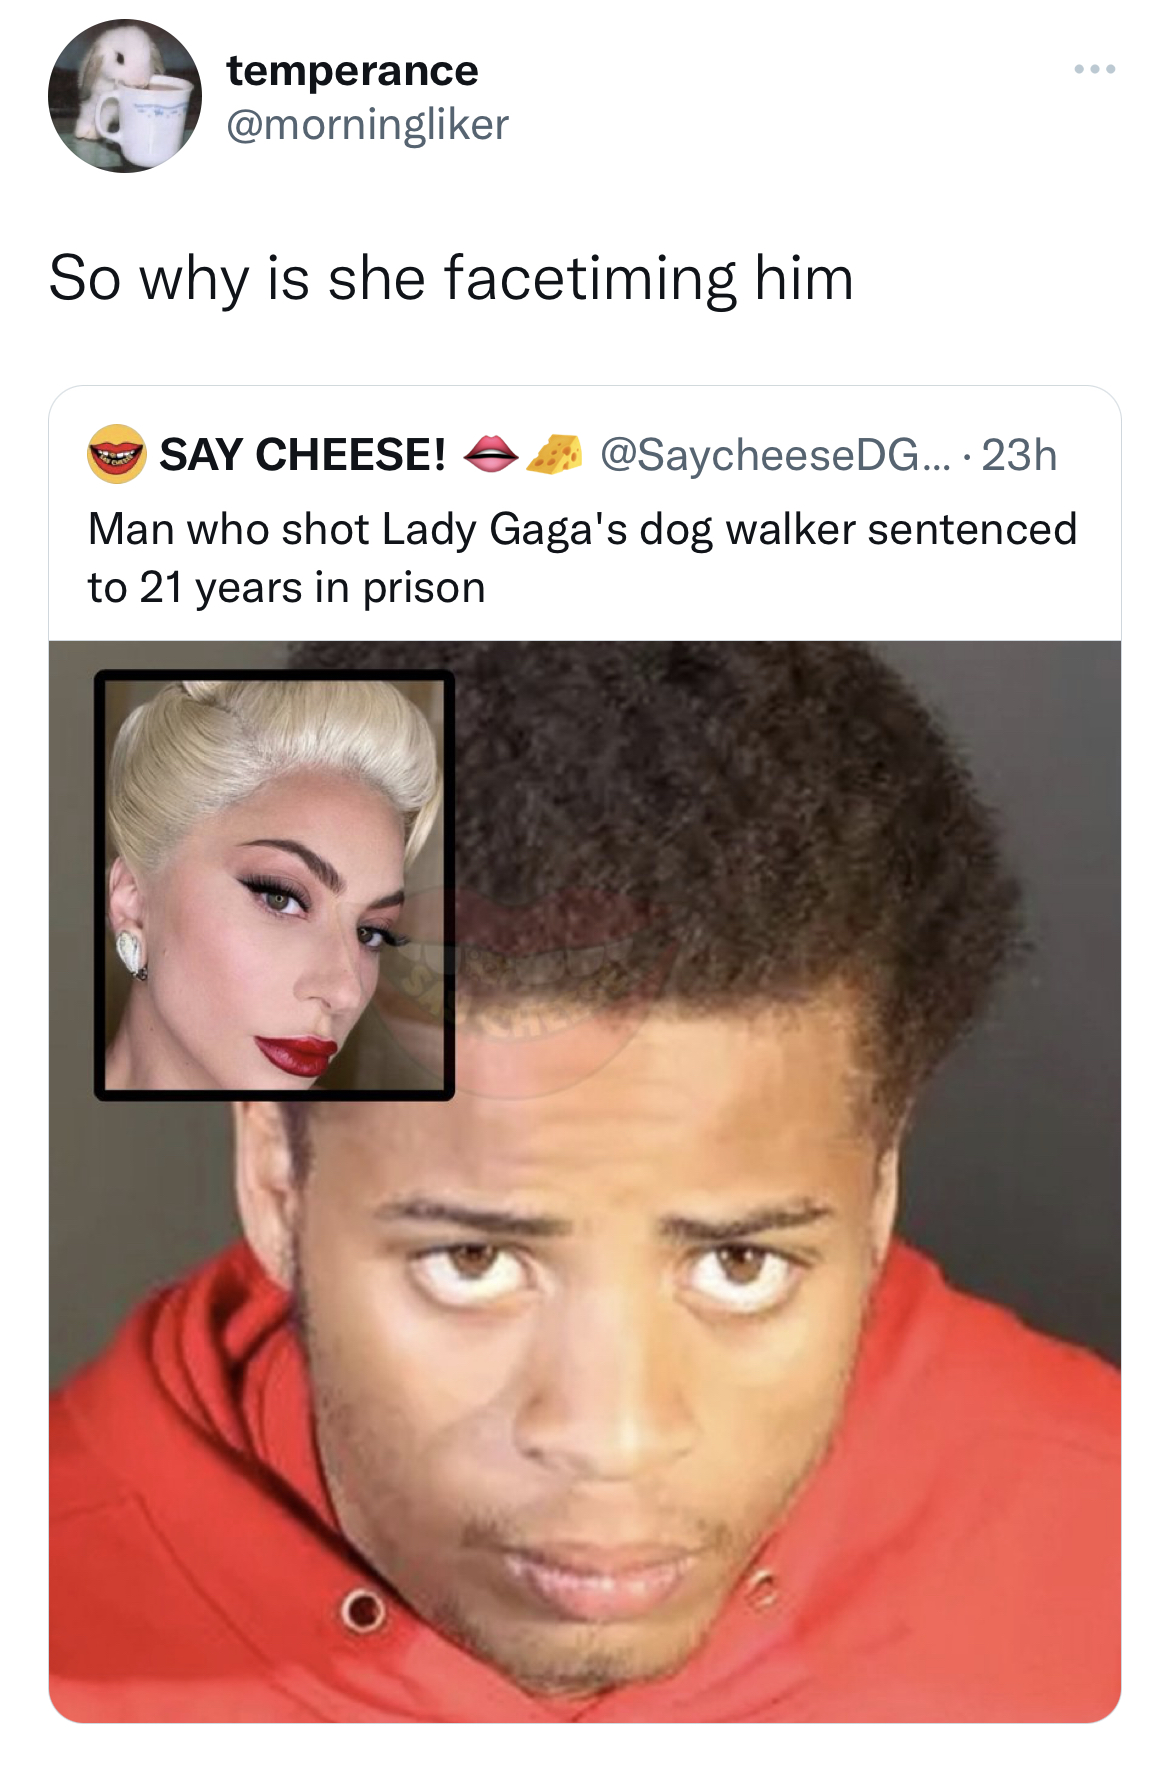 tweets roasting celebs - james howard jackson - temperance So why is she facetiming him Say Cheese! ... 23h Man who shot Lady Gaga's dog walker sentenced to 21 years in prison